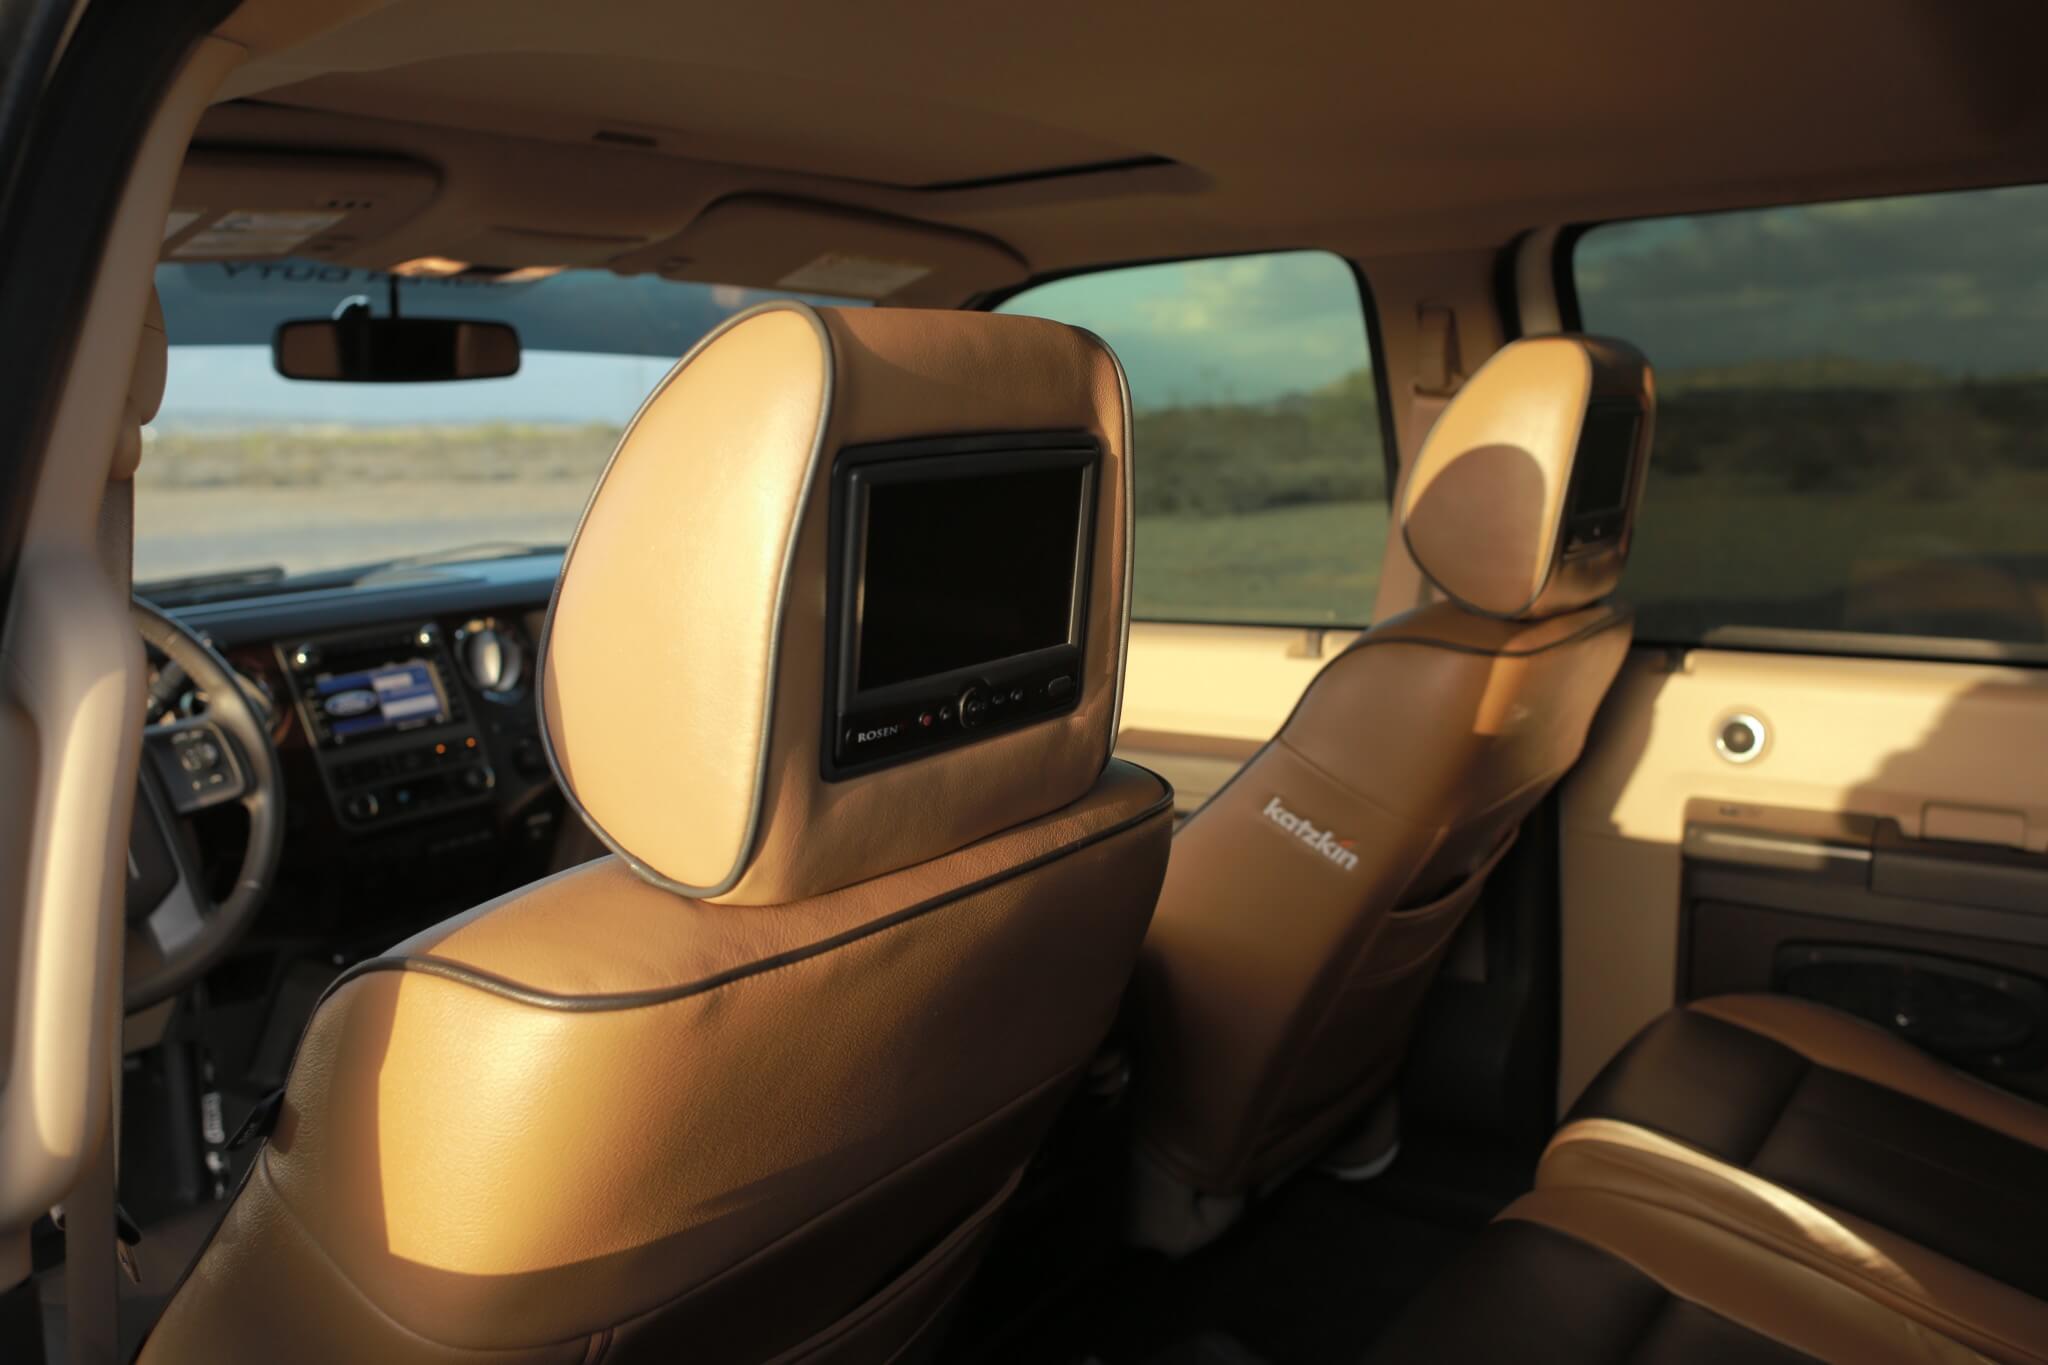 Passengers will have plenty of entertainment on the road as the front seats were fitted with Rosen Electronics AV7900 headrest replacement systems with media players and monitors. 